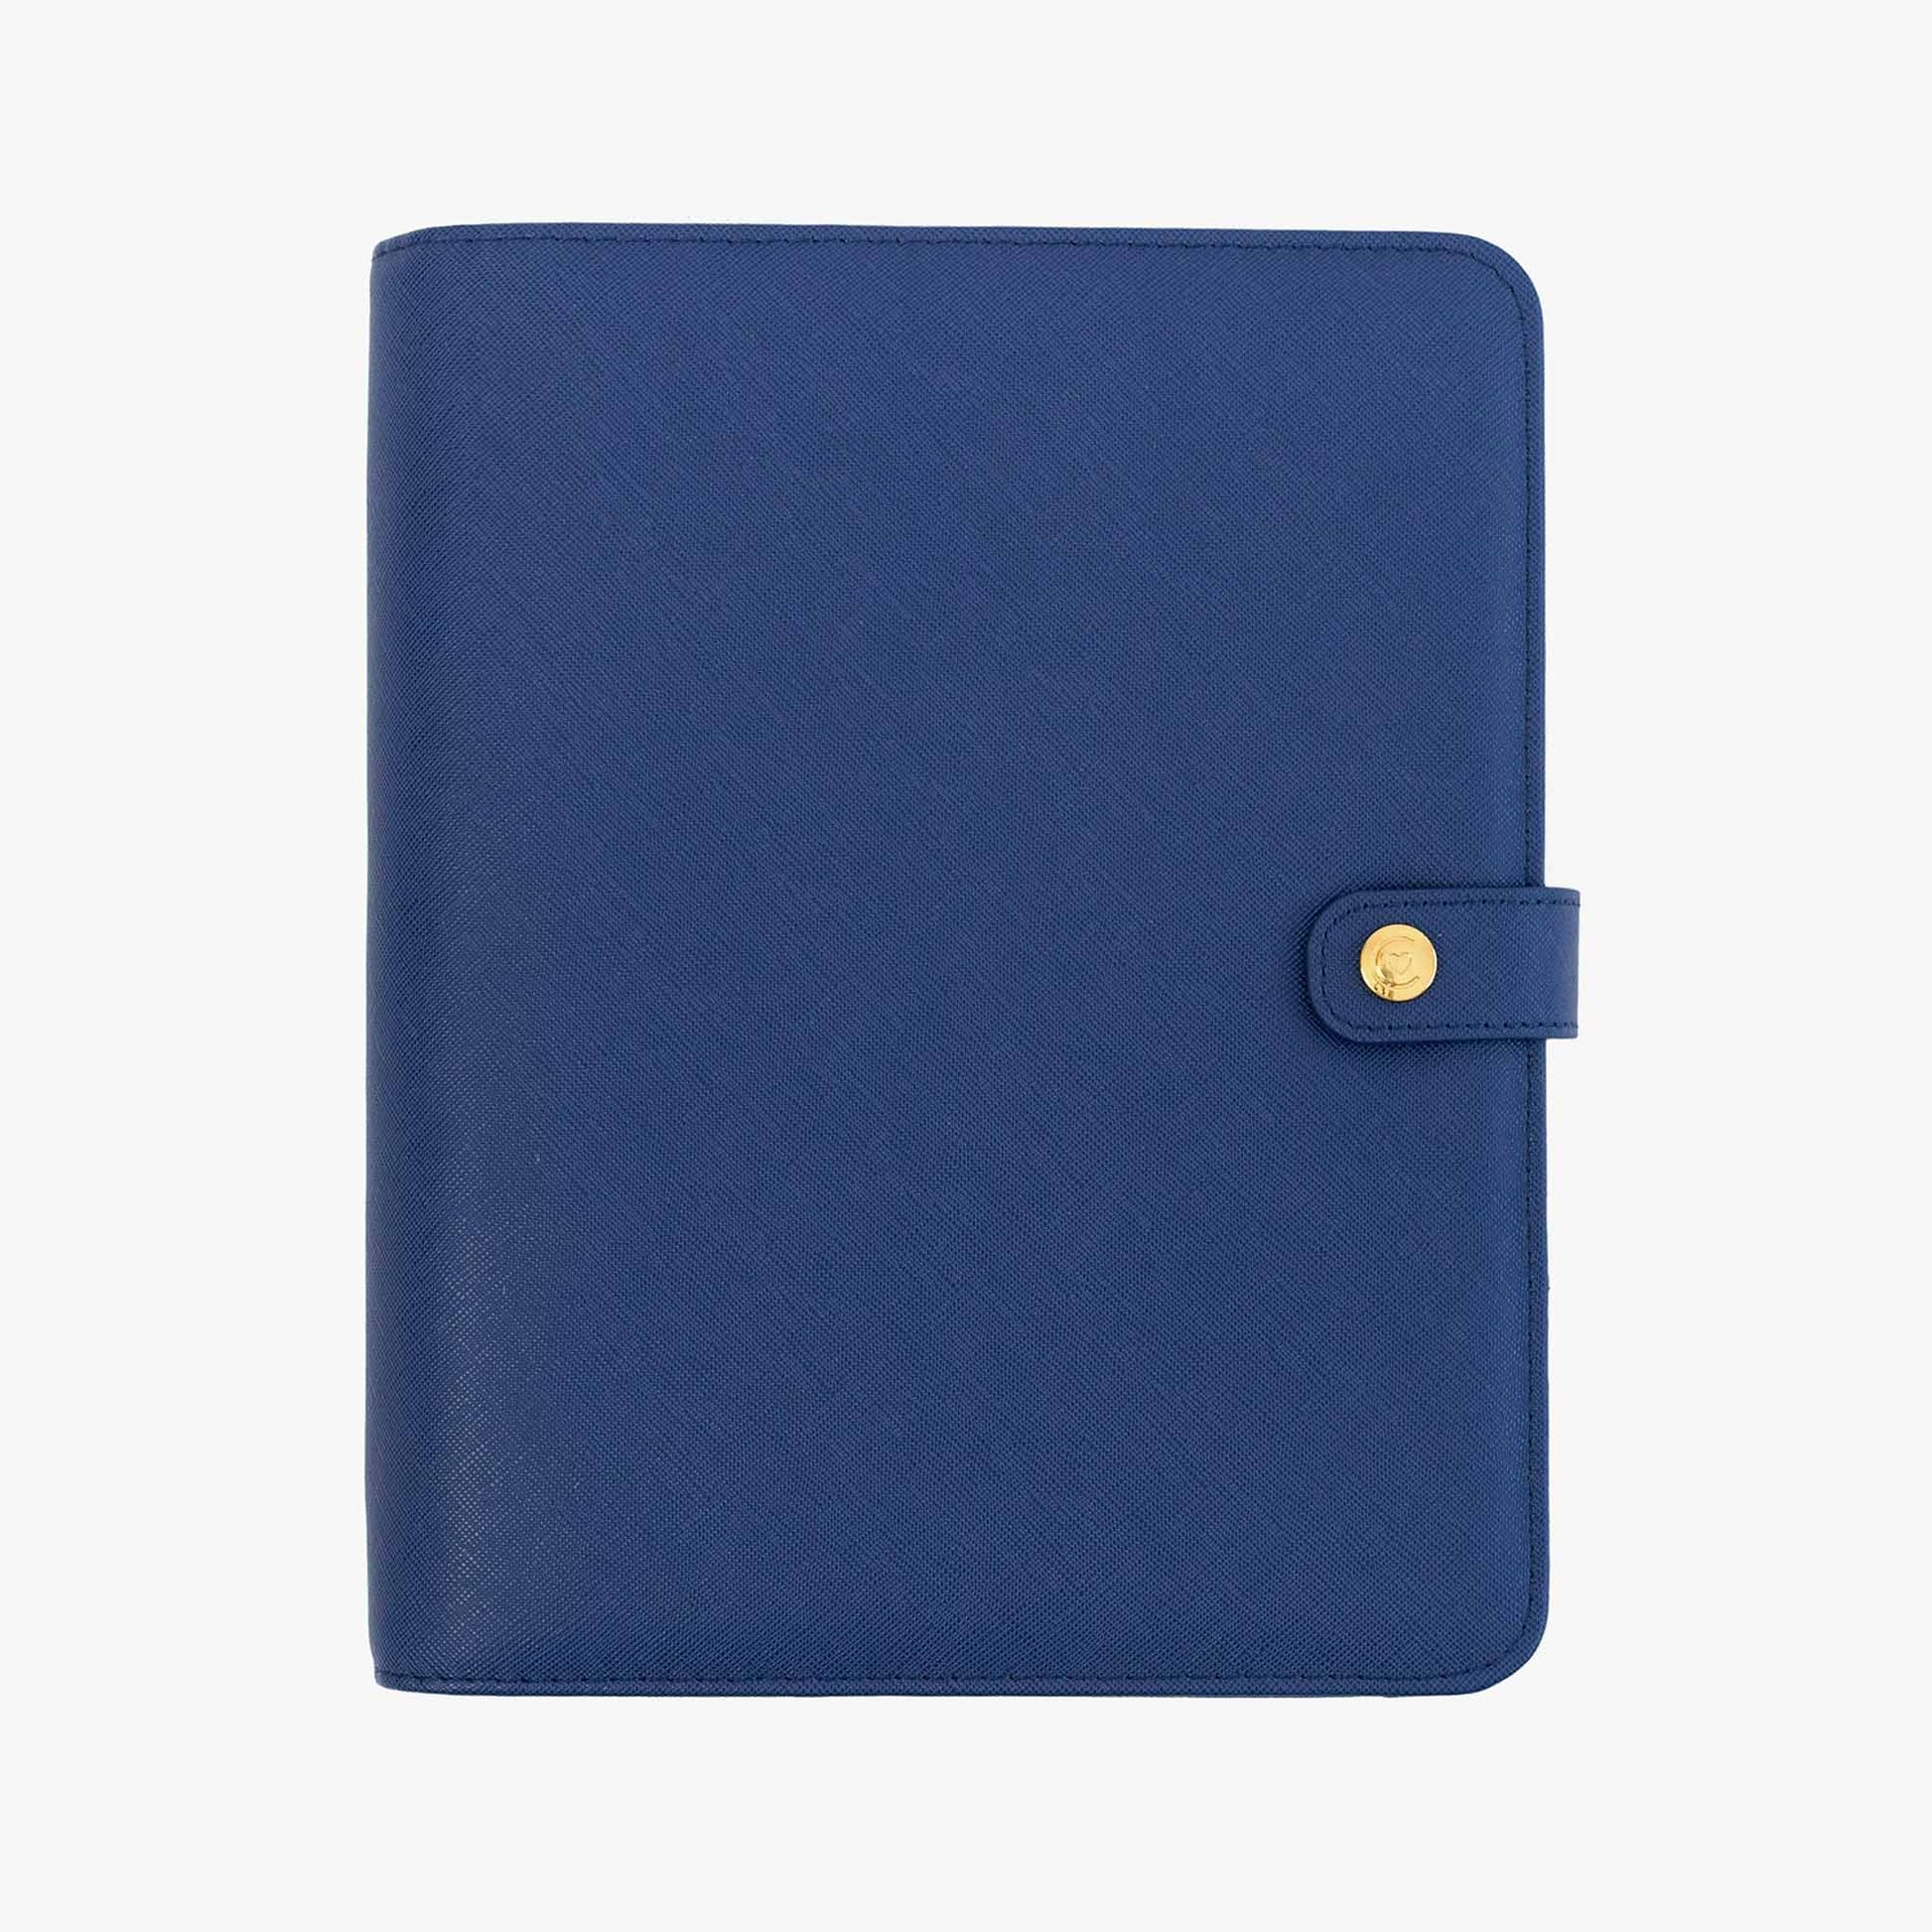 Planner personal A5. Navy.